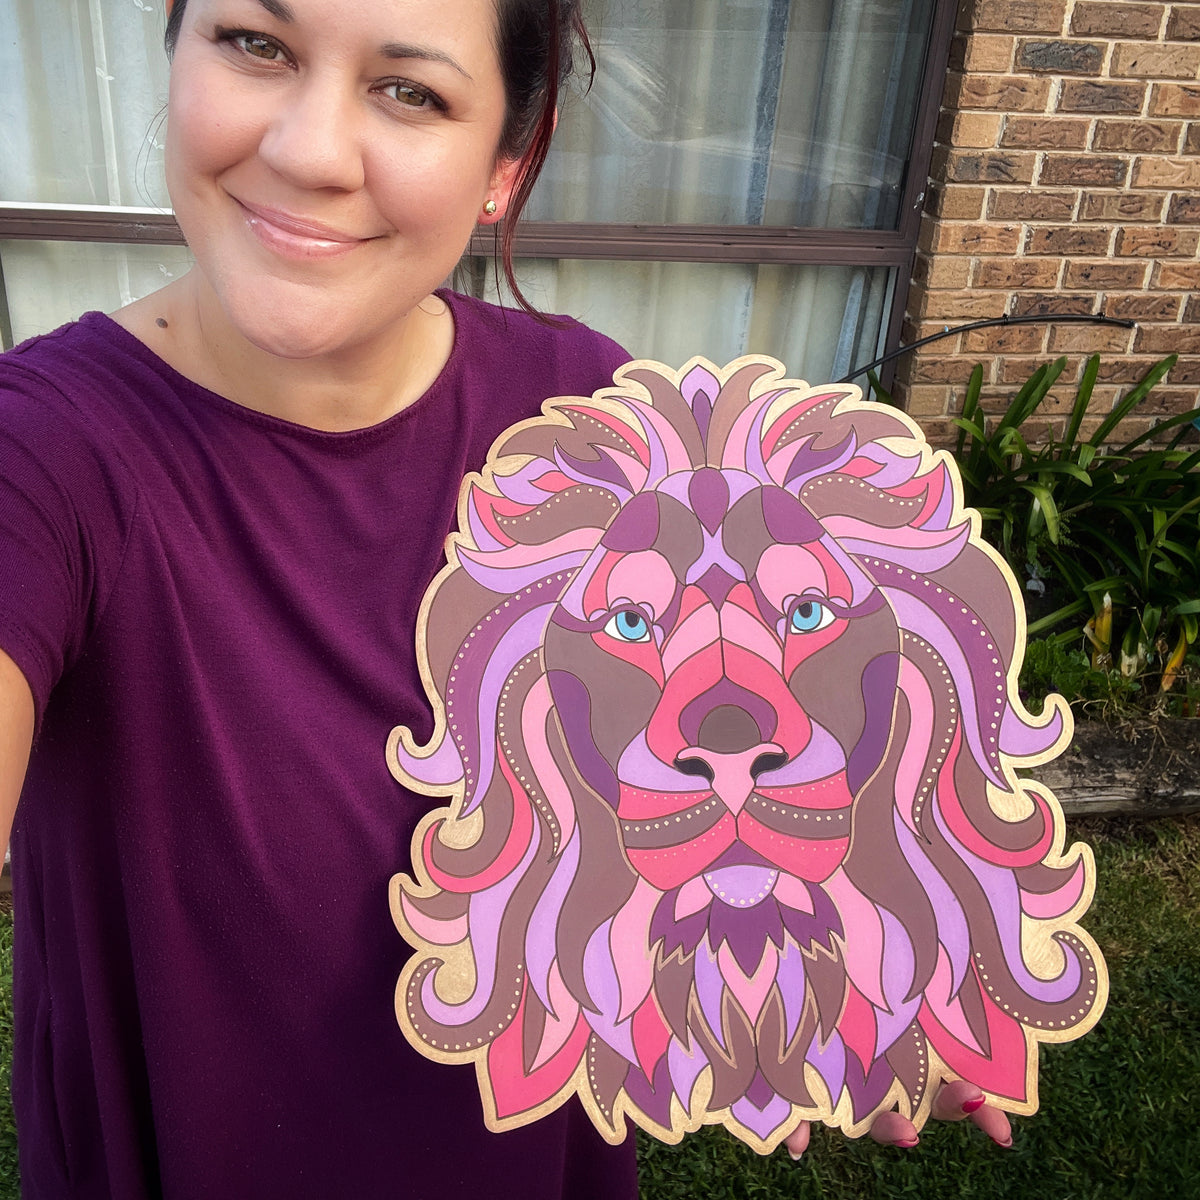 Life of Colour Lion Painting Kit